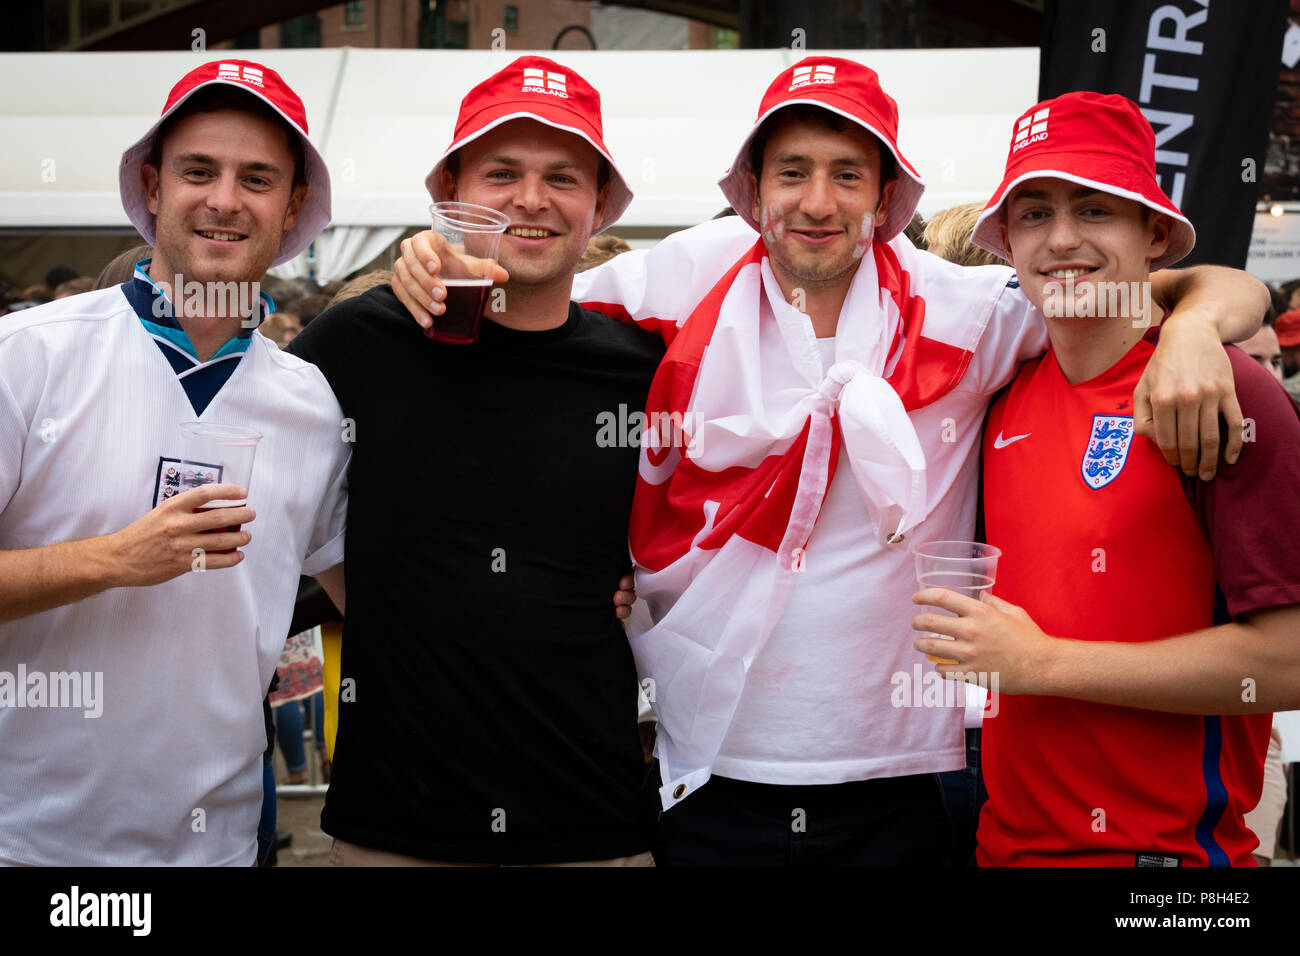 Manchester, UK 11 July 2018. Fans react to FIFA World Cup semi-final match between England and Croatia at the Auto Trader World Cup screening. Credit: Andy Barton/Alamy Live News Stock Photo